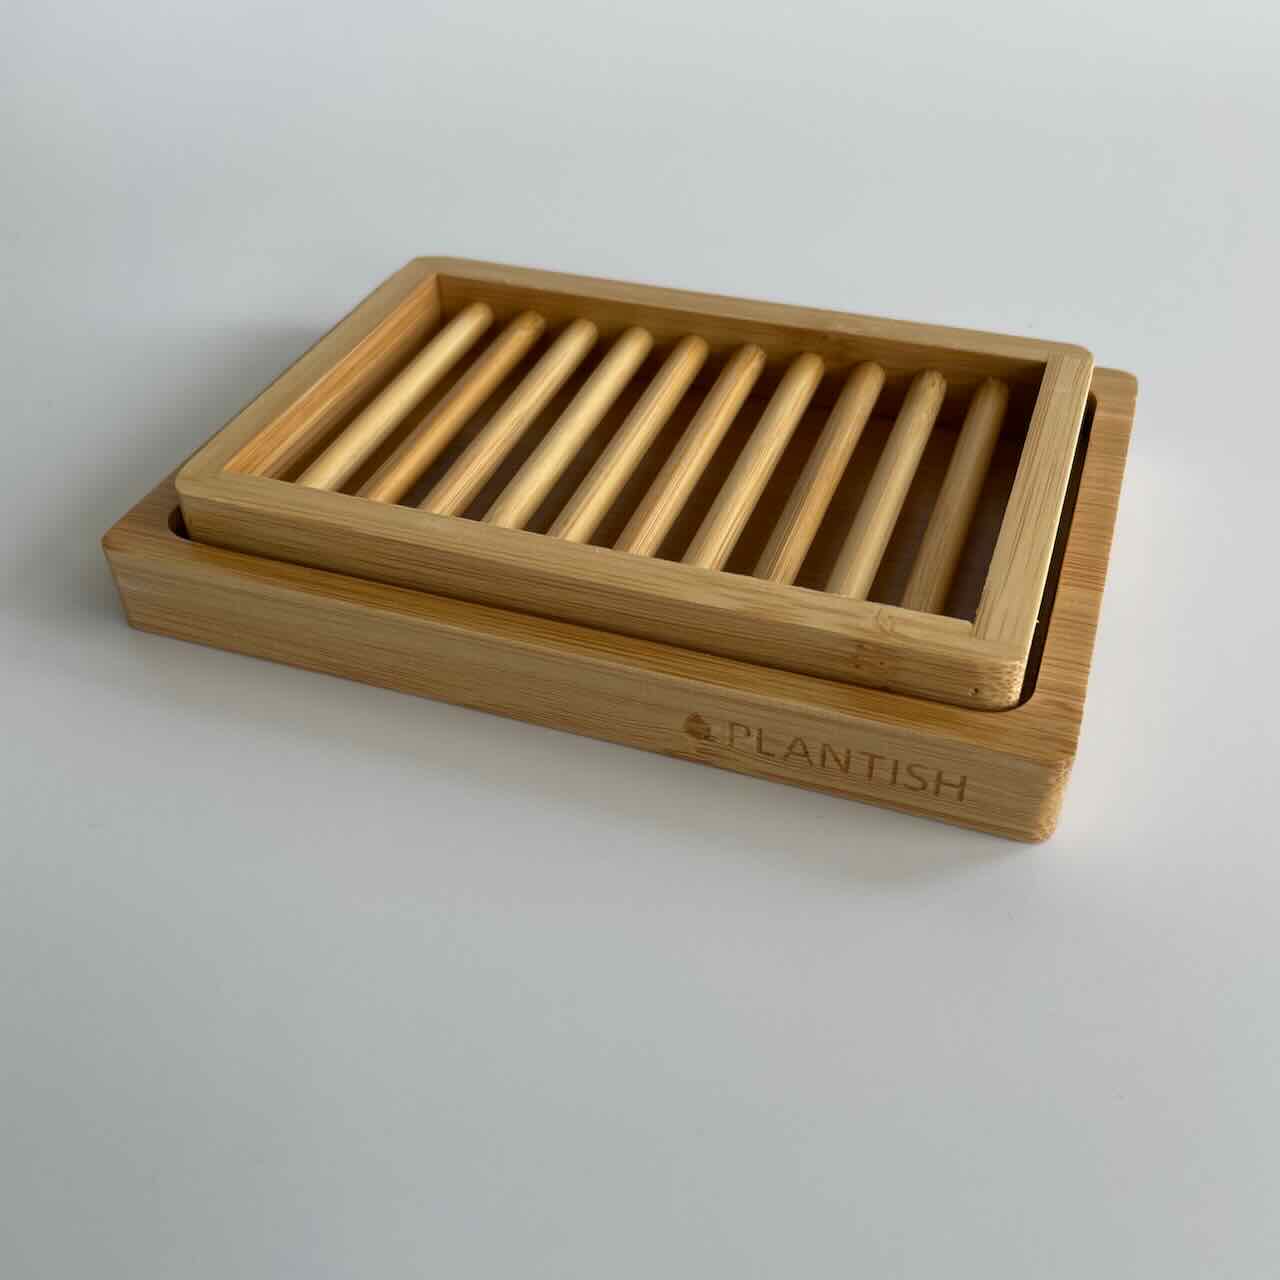 A bamboo two layered soap dish on a white table top.